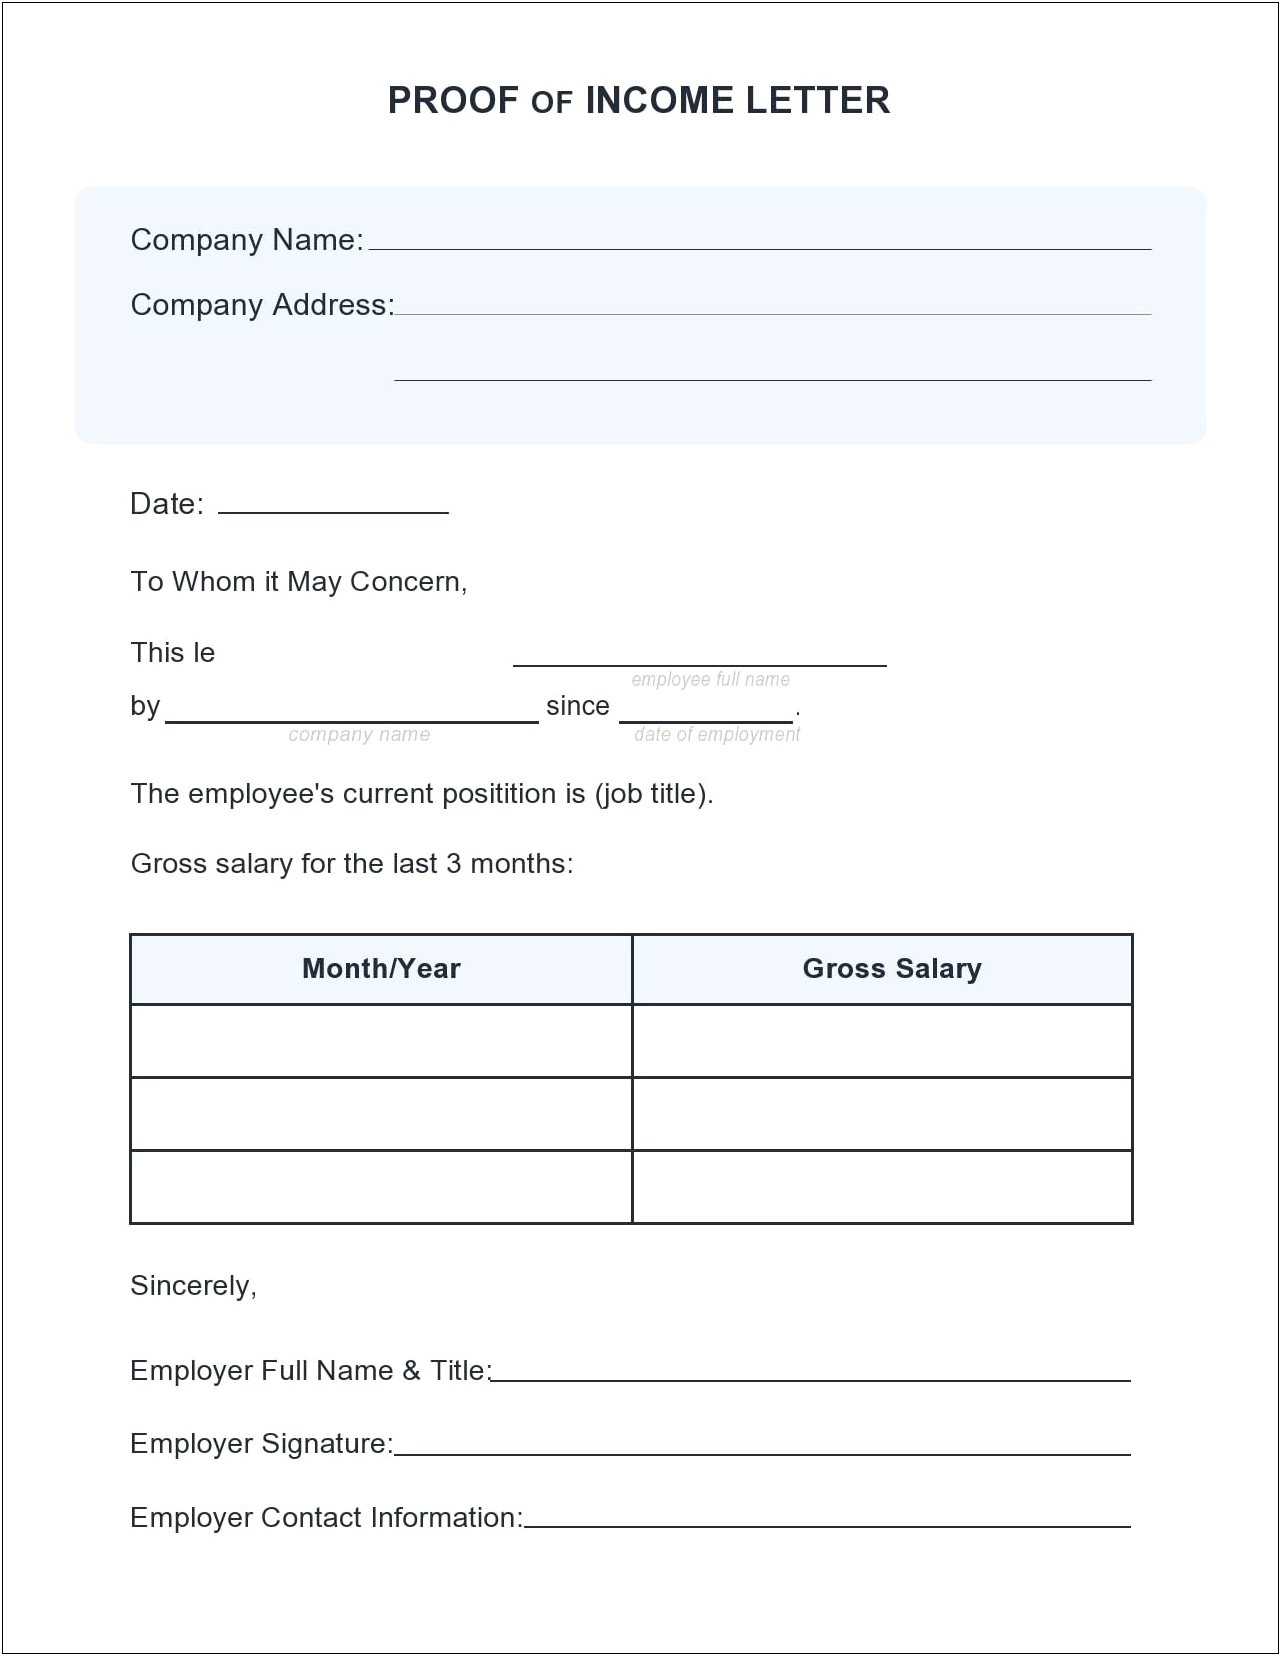 Capital One Income Verification Letter Template